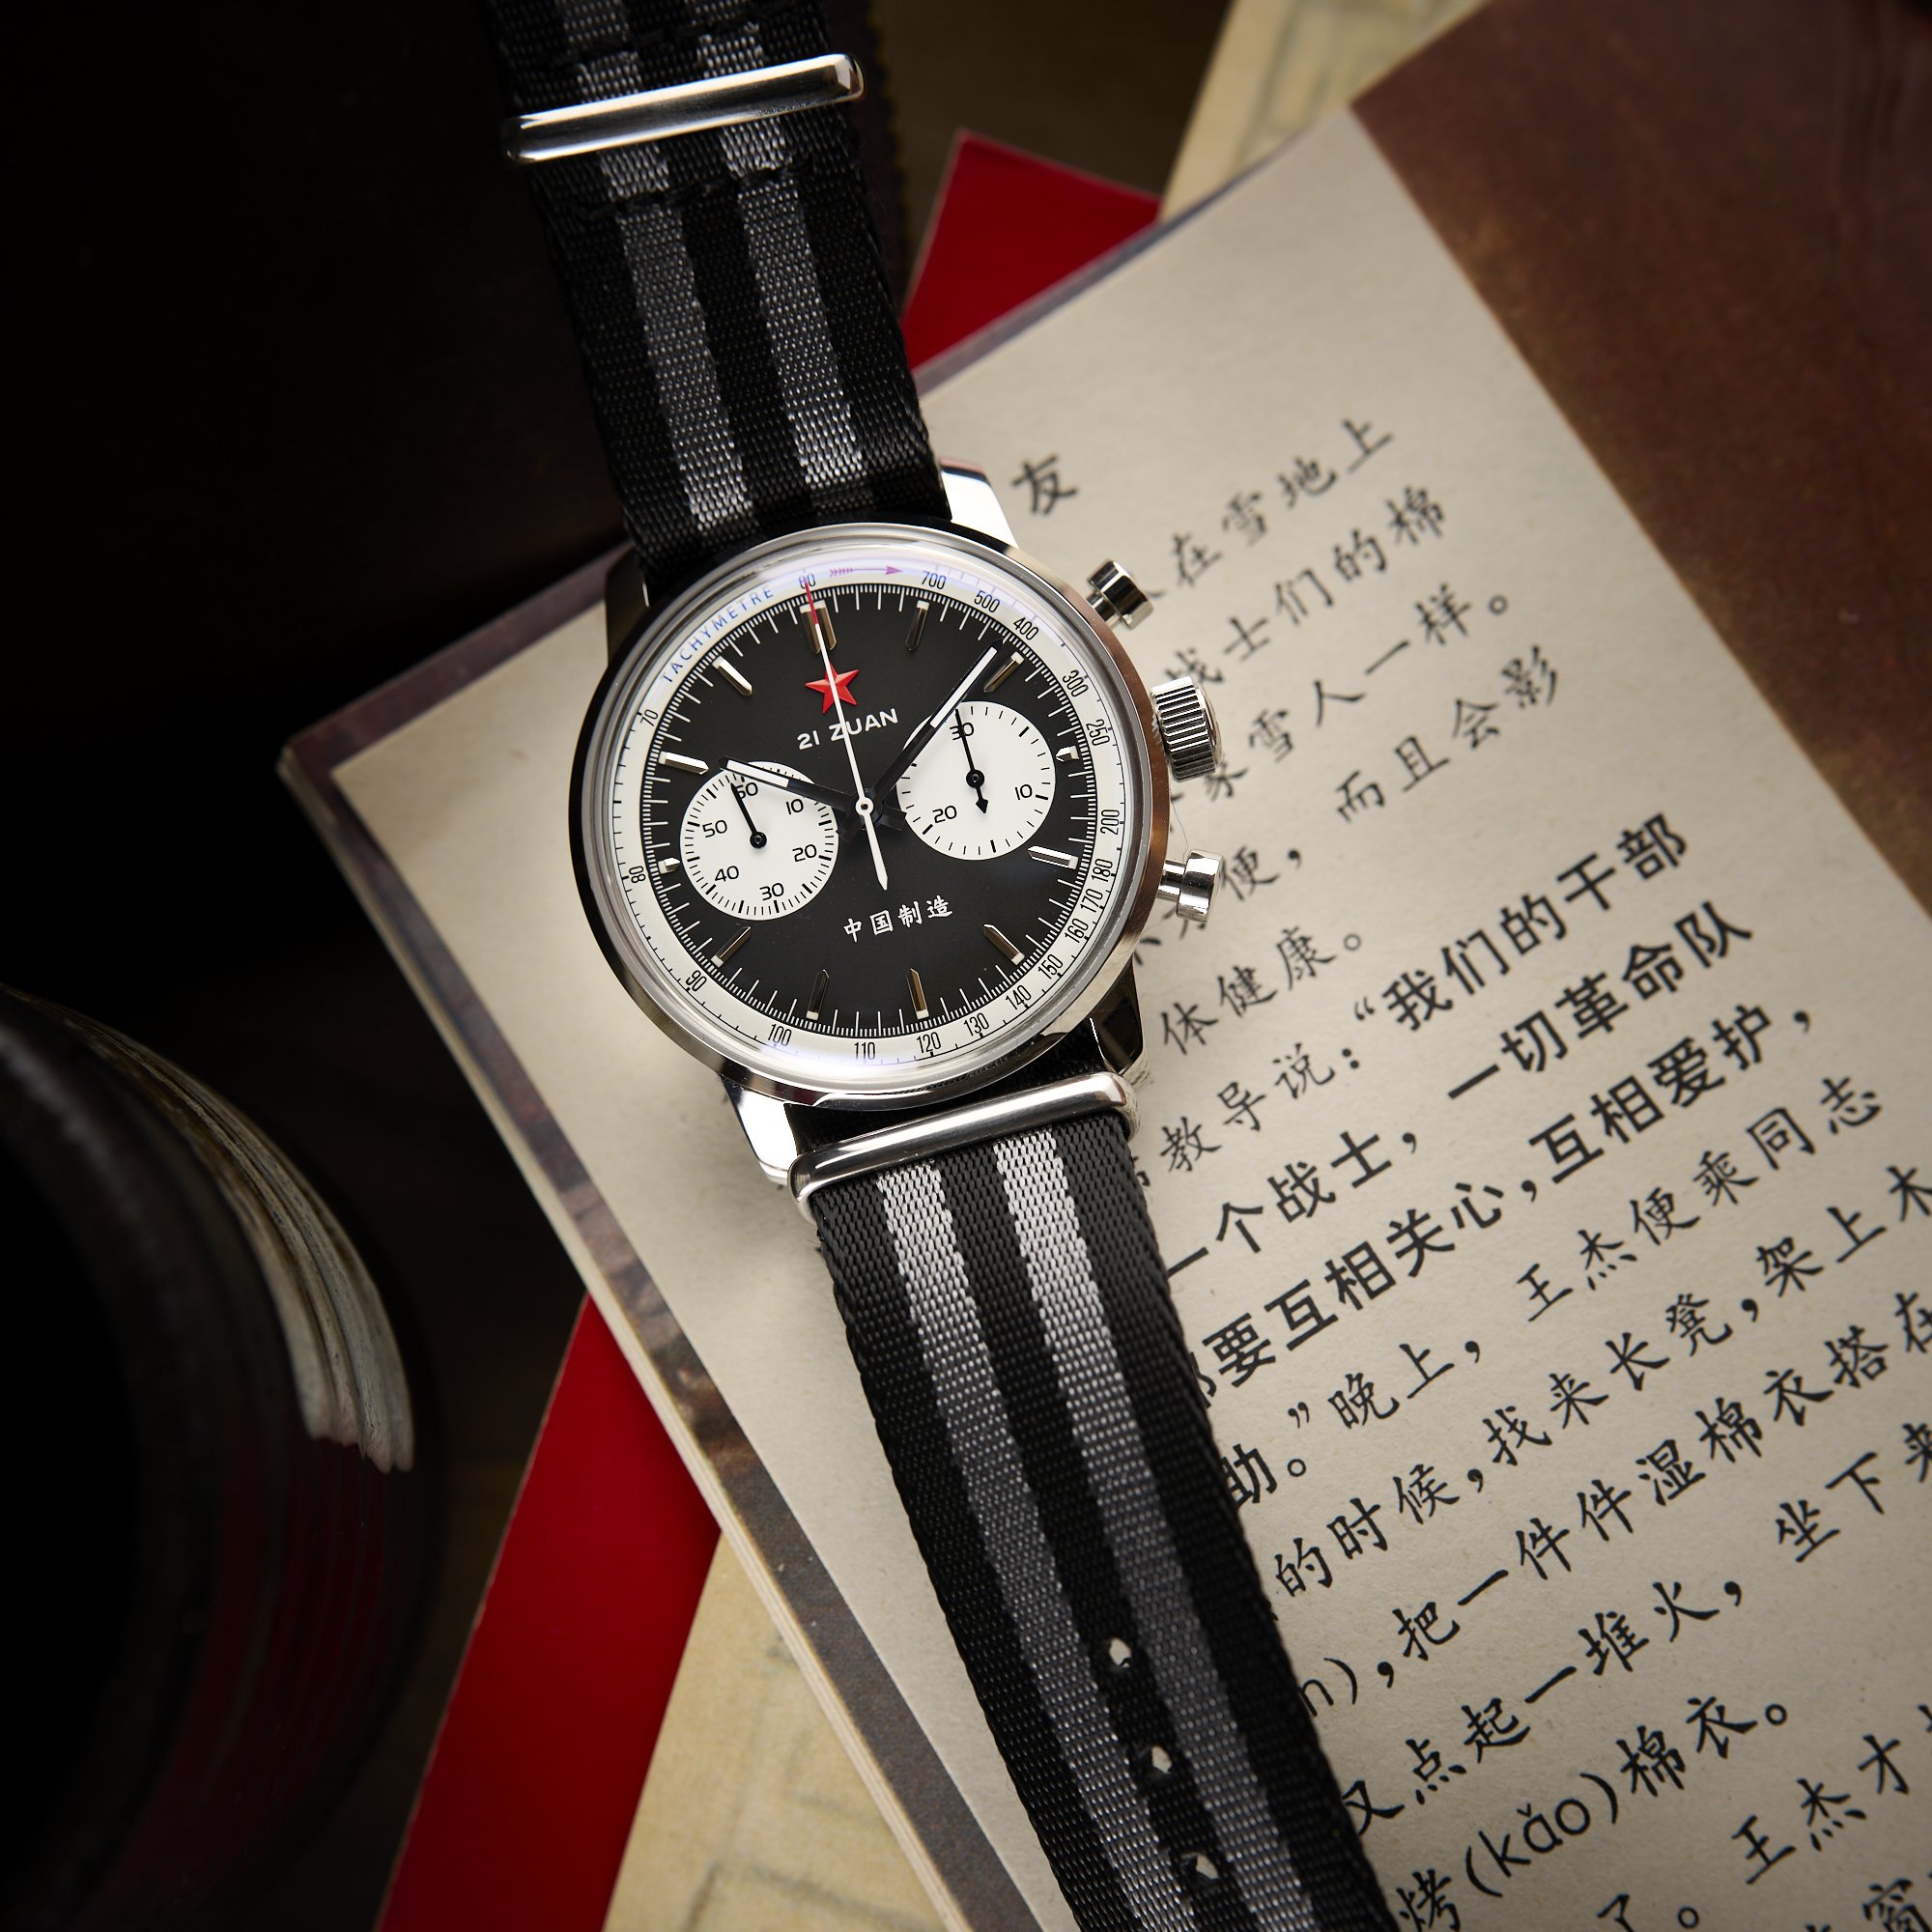 Trends PANDA: PROTECTED SPECIES | Watches News